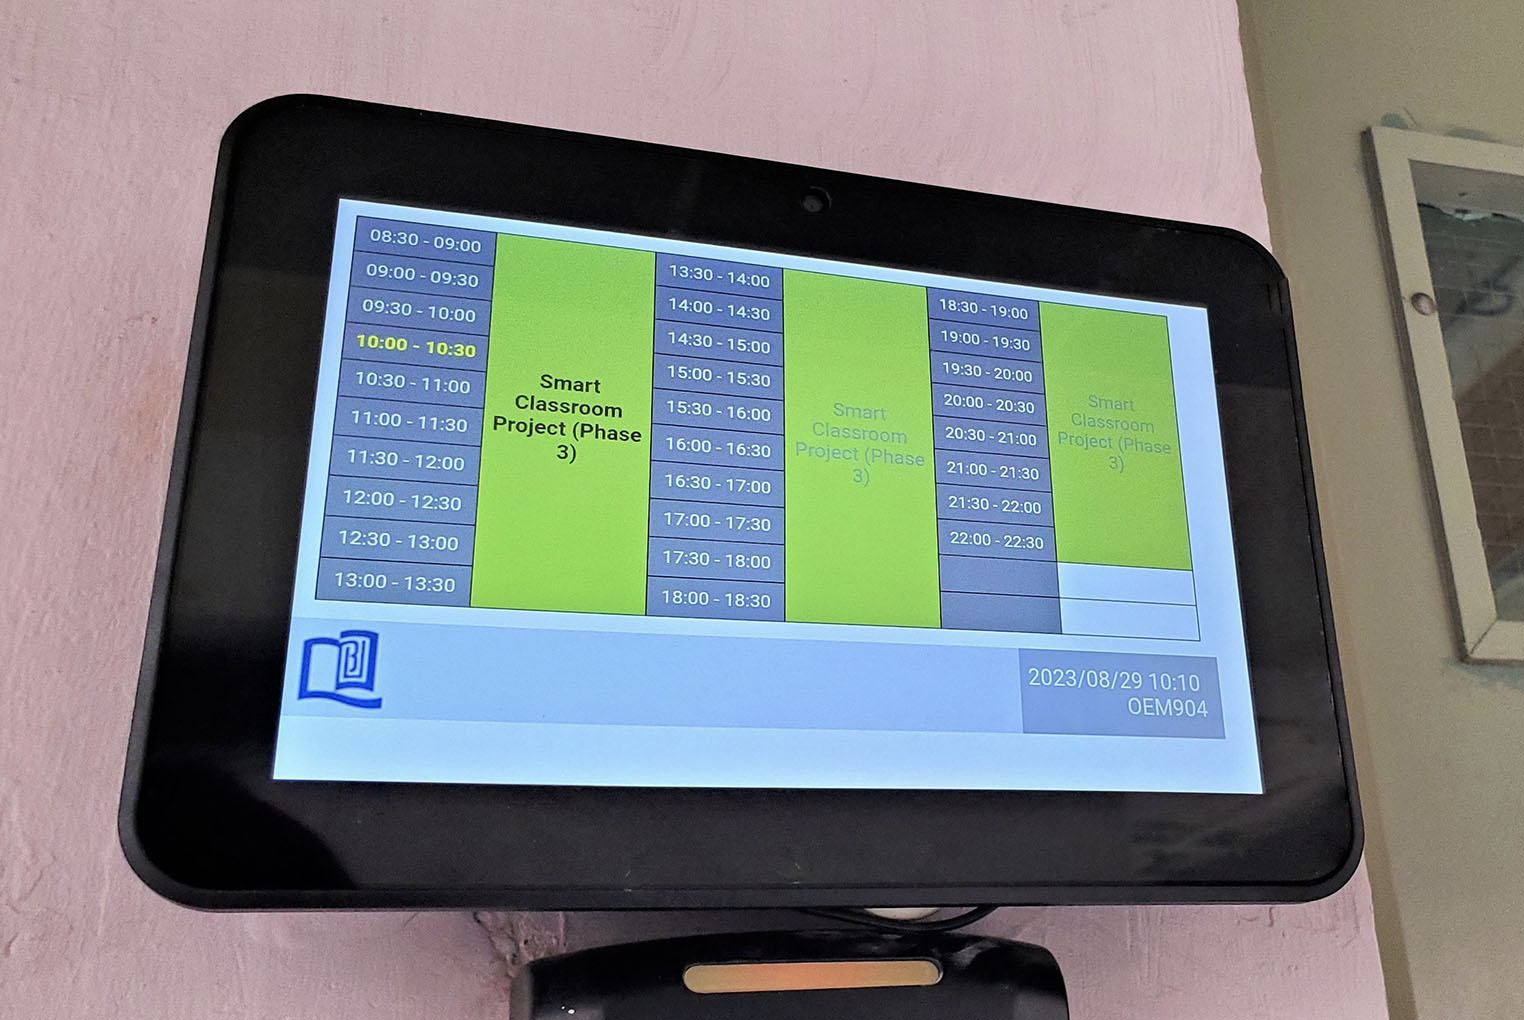 Classrooms with Smart Sensor Control for Lighting and AC systems on/off